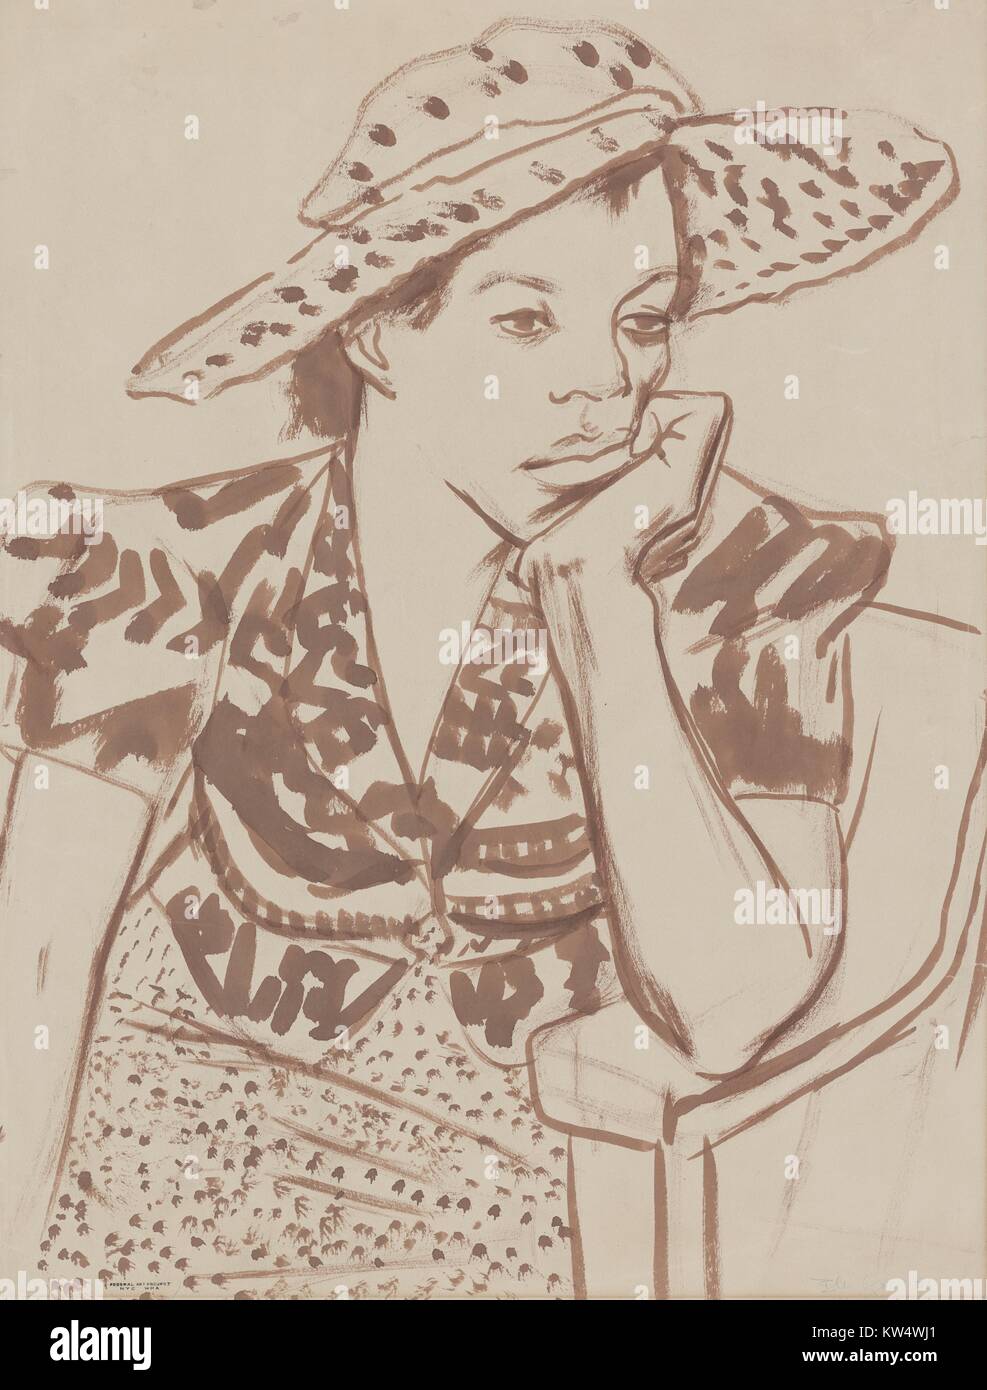 Work progress administration (WPA) painting of African-American woman seated with hat in studio, appearing bored, with her head resting on her hand, 1939. From the New York Public Library. Stock Photo